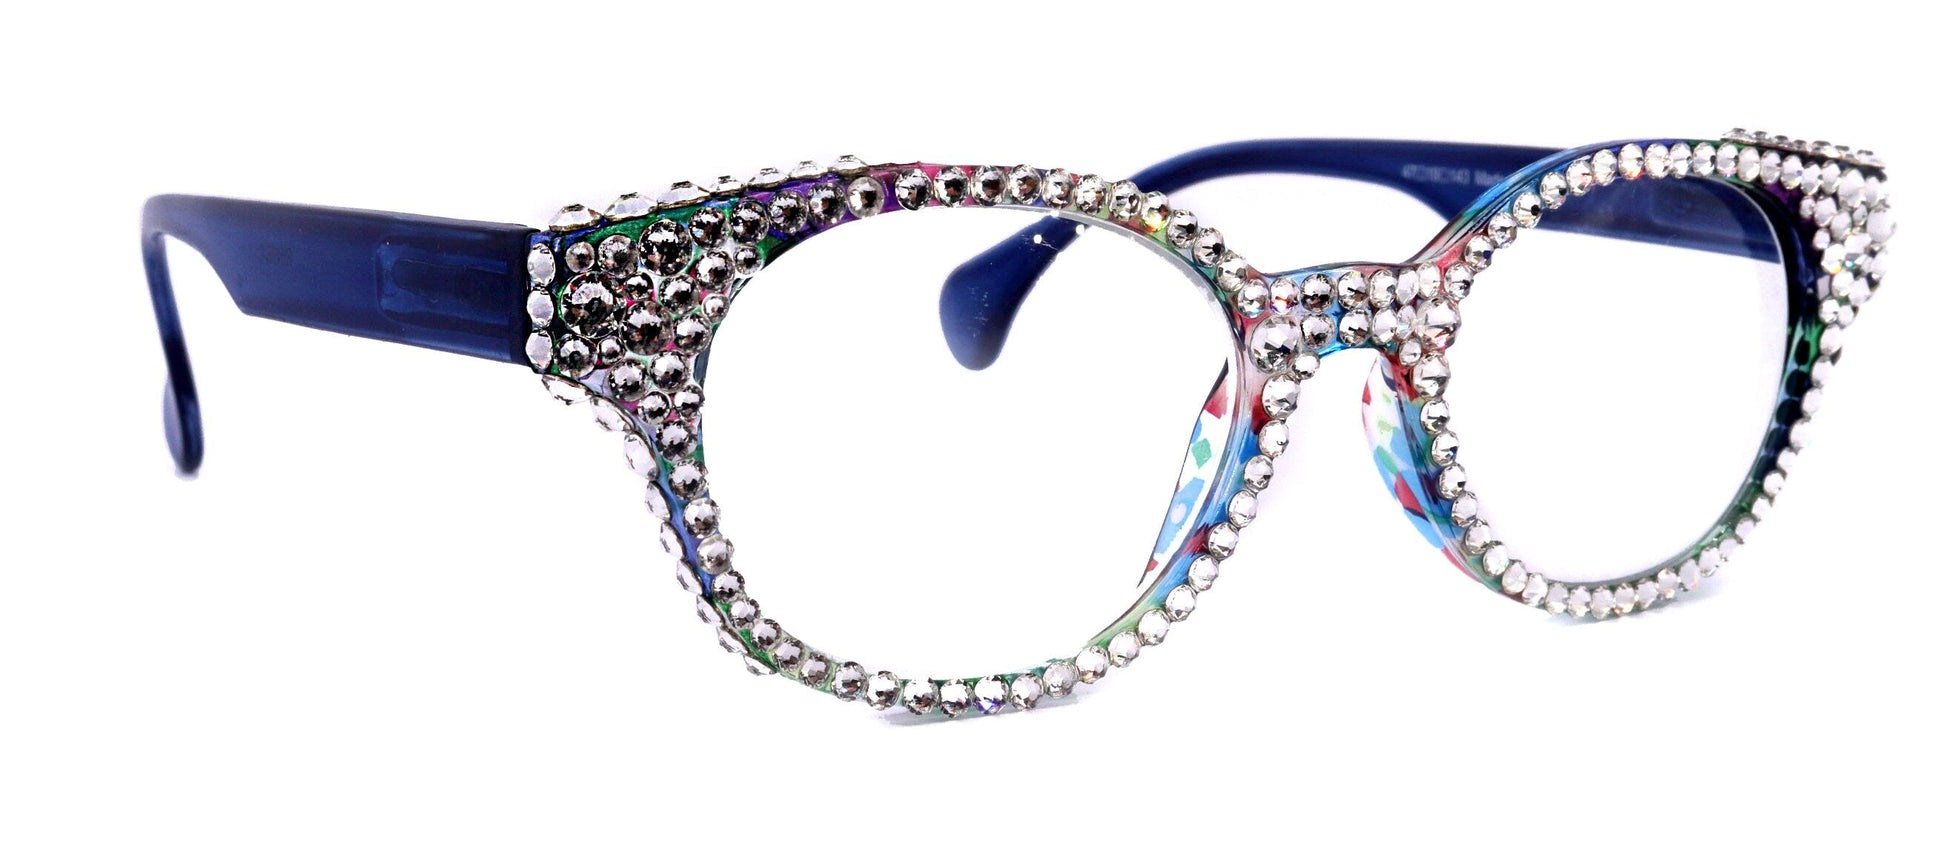 Autumn, (Bling) Reading Glasses For Women W (Full Crystals) Genuine European Crystals  Round Frame (Blue, Purple Floral) NY Fifth Avenue 